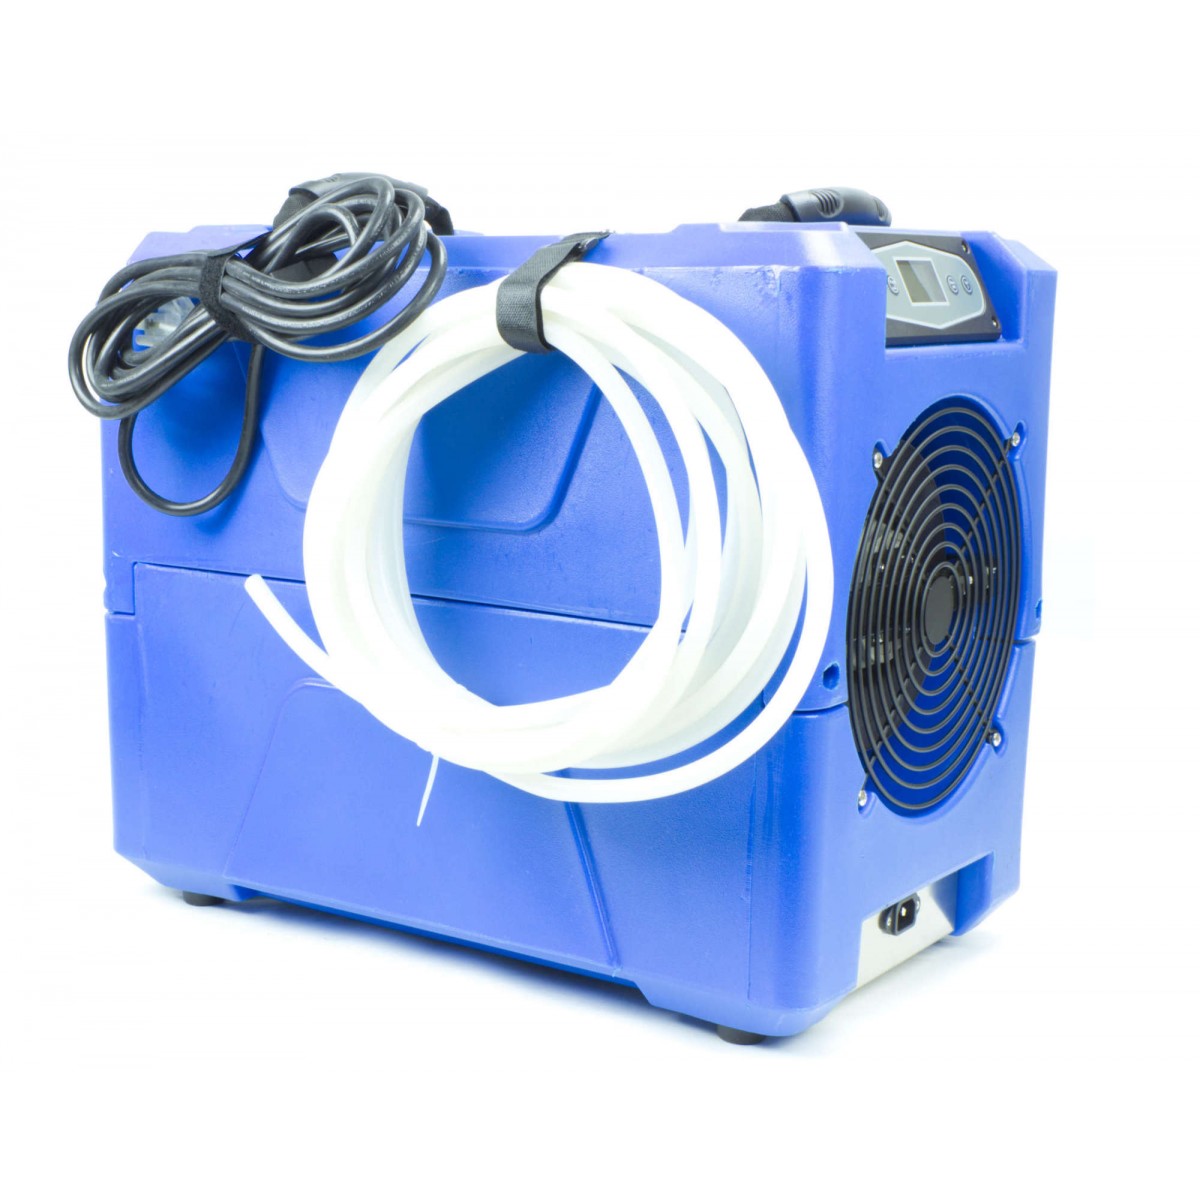 Dehumidifier Commercial With A Capacity Of 80Pt/Day (45.4609 Liters By Day) - Side View